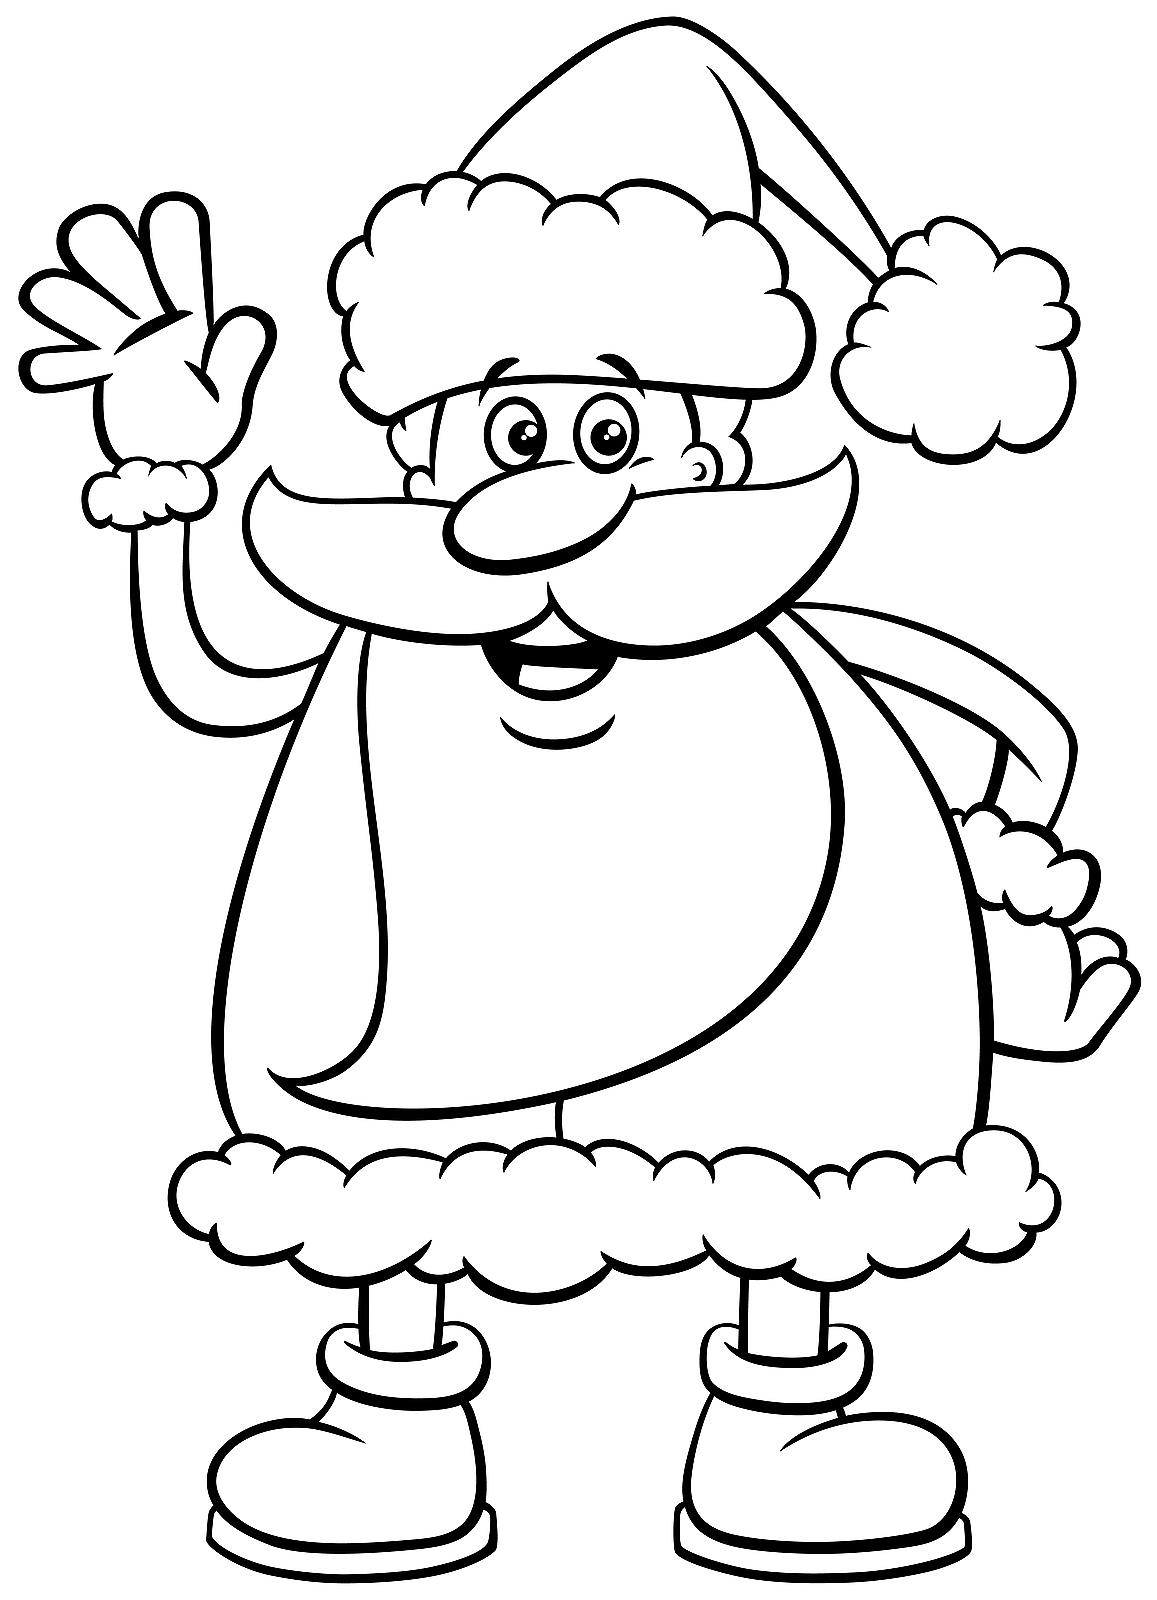 Santa claus coloring pages free coloring pages of jolly old st nick for christmas fun holidays mom